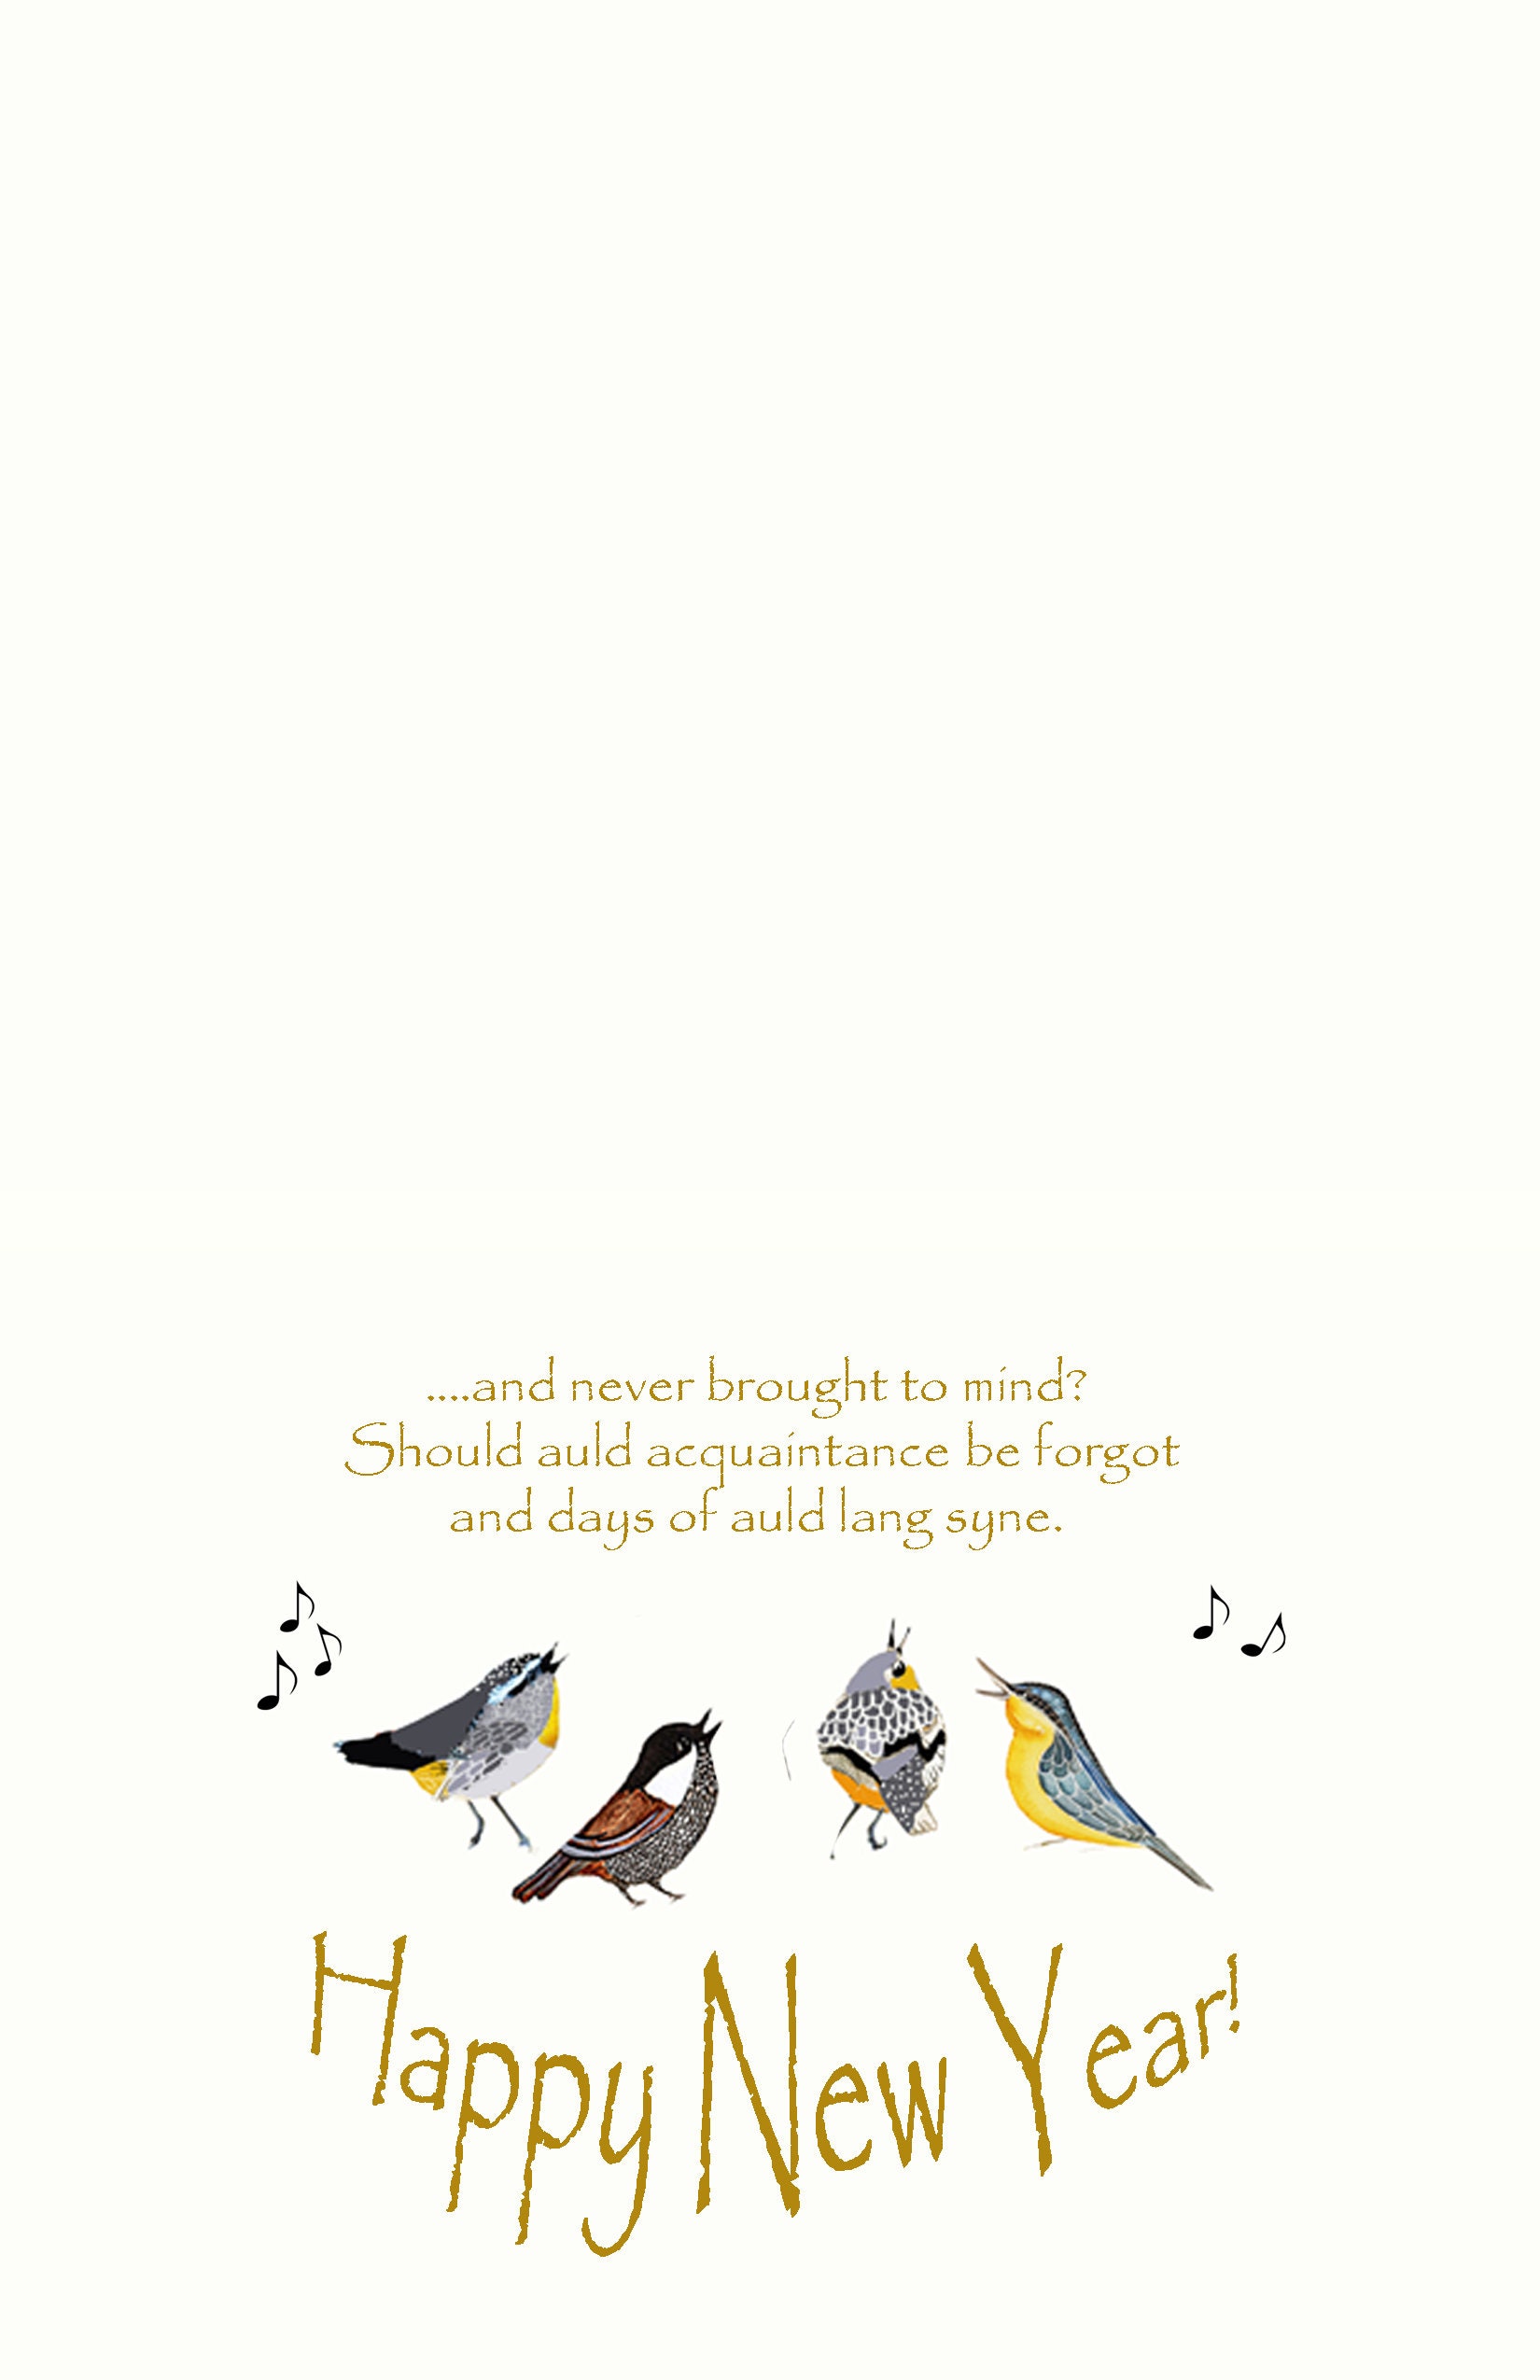 Gift Box of 10 Little Birds Singing Greeting Cards~10 SONGBIRDS  Notecards~Friends~Musical Birds Cards Notes~Fantasy Birds Gift